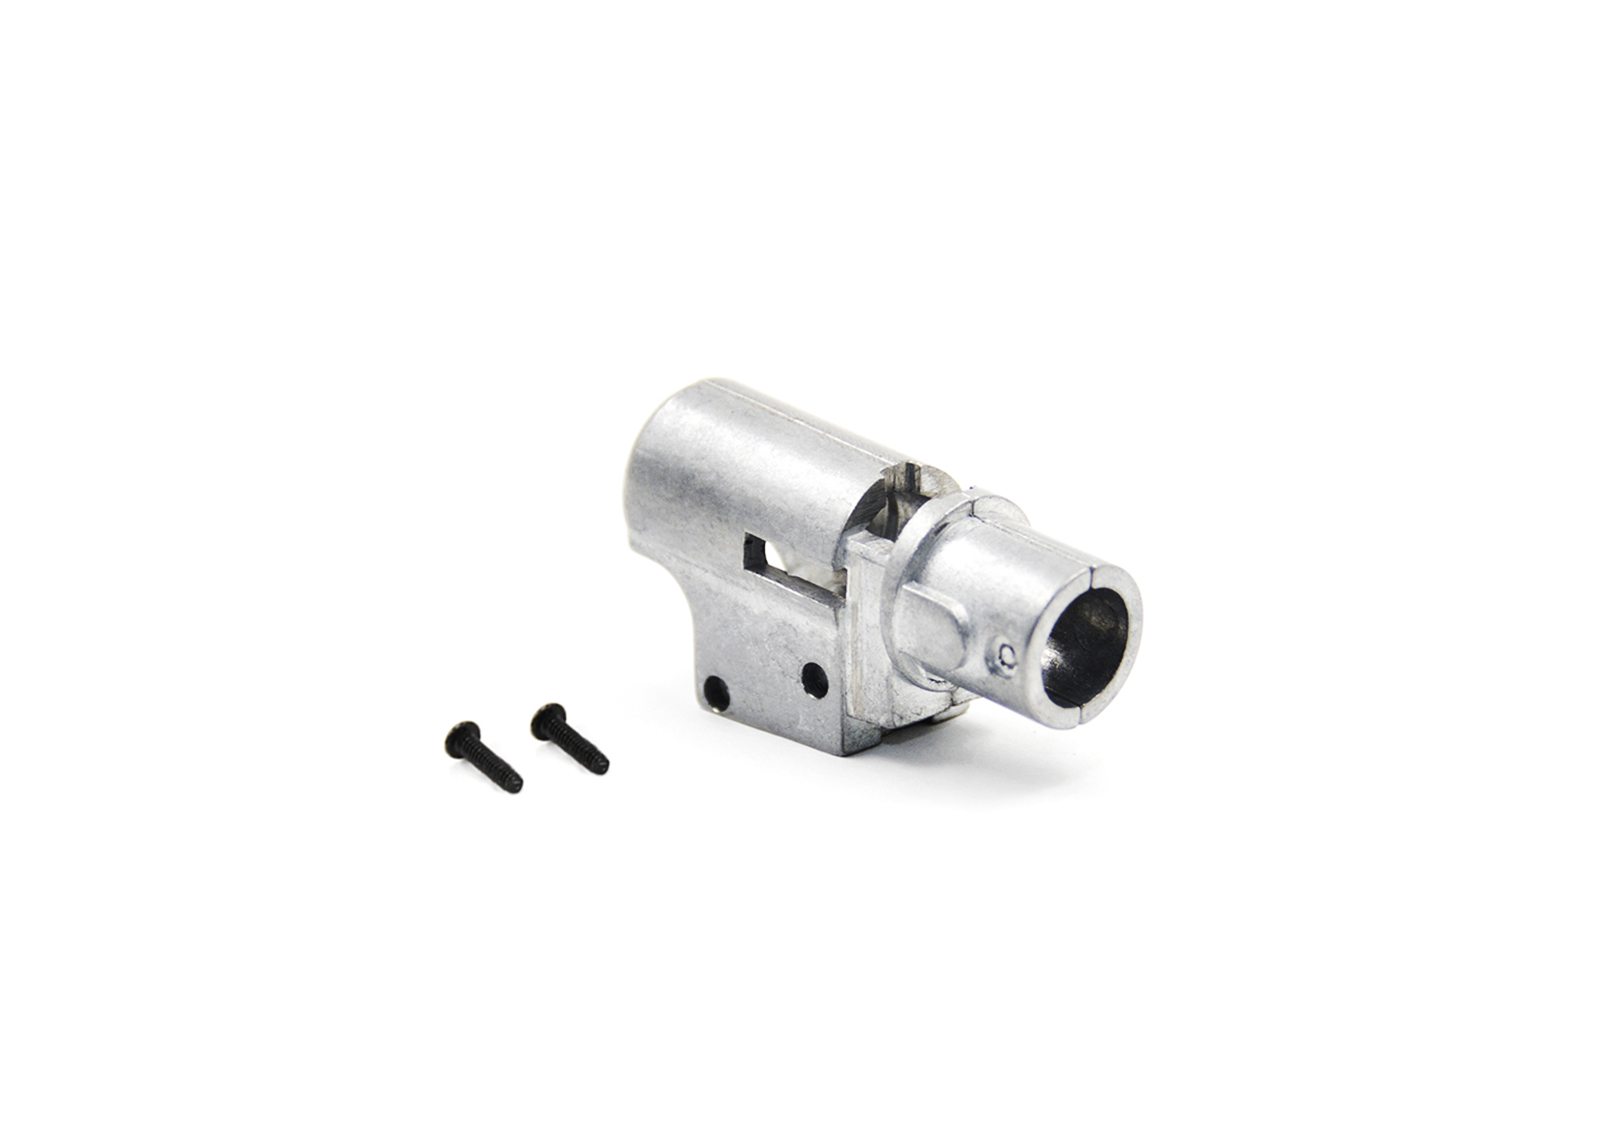 PP-2K/OTs-126 Metal hop up chamber with screws